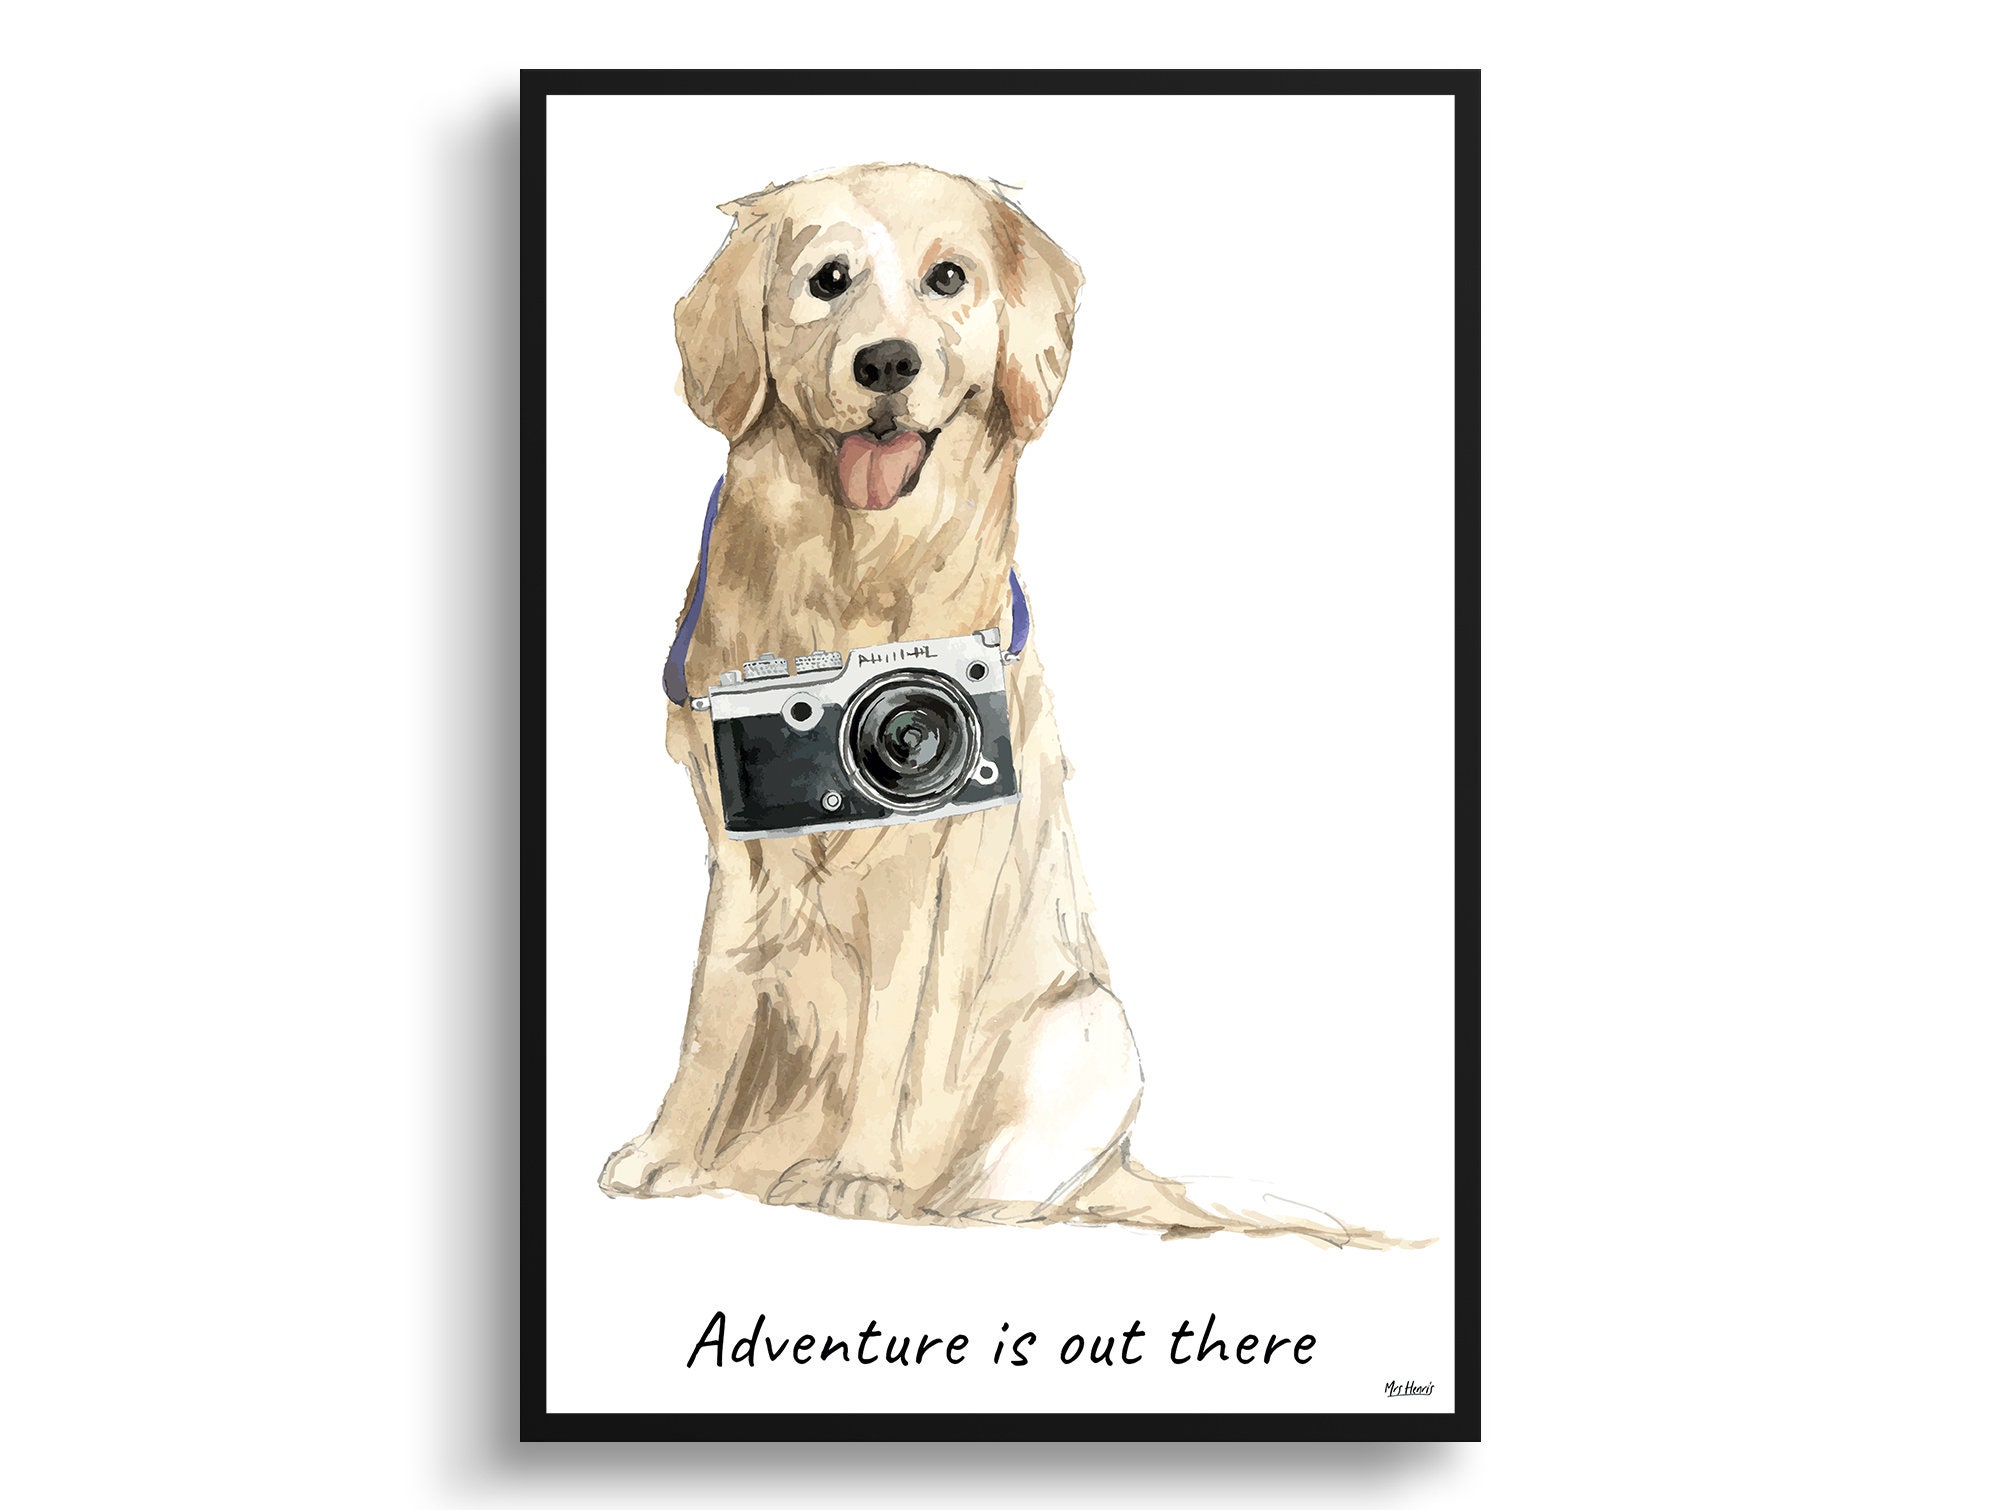 Adventure Is Out There Golden Retriever Dog Print Illustration. Framed & Un-Framed Wall Art Options. Personalised Name